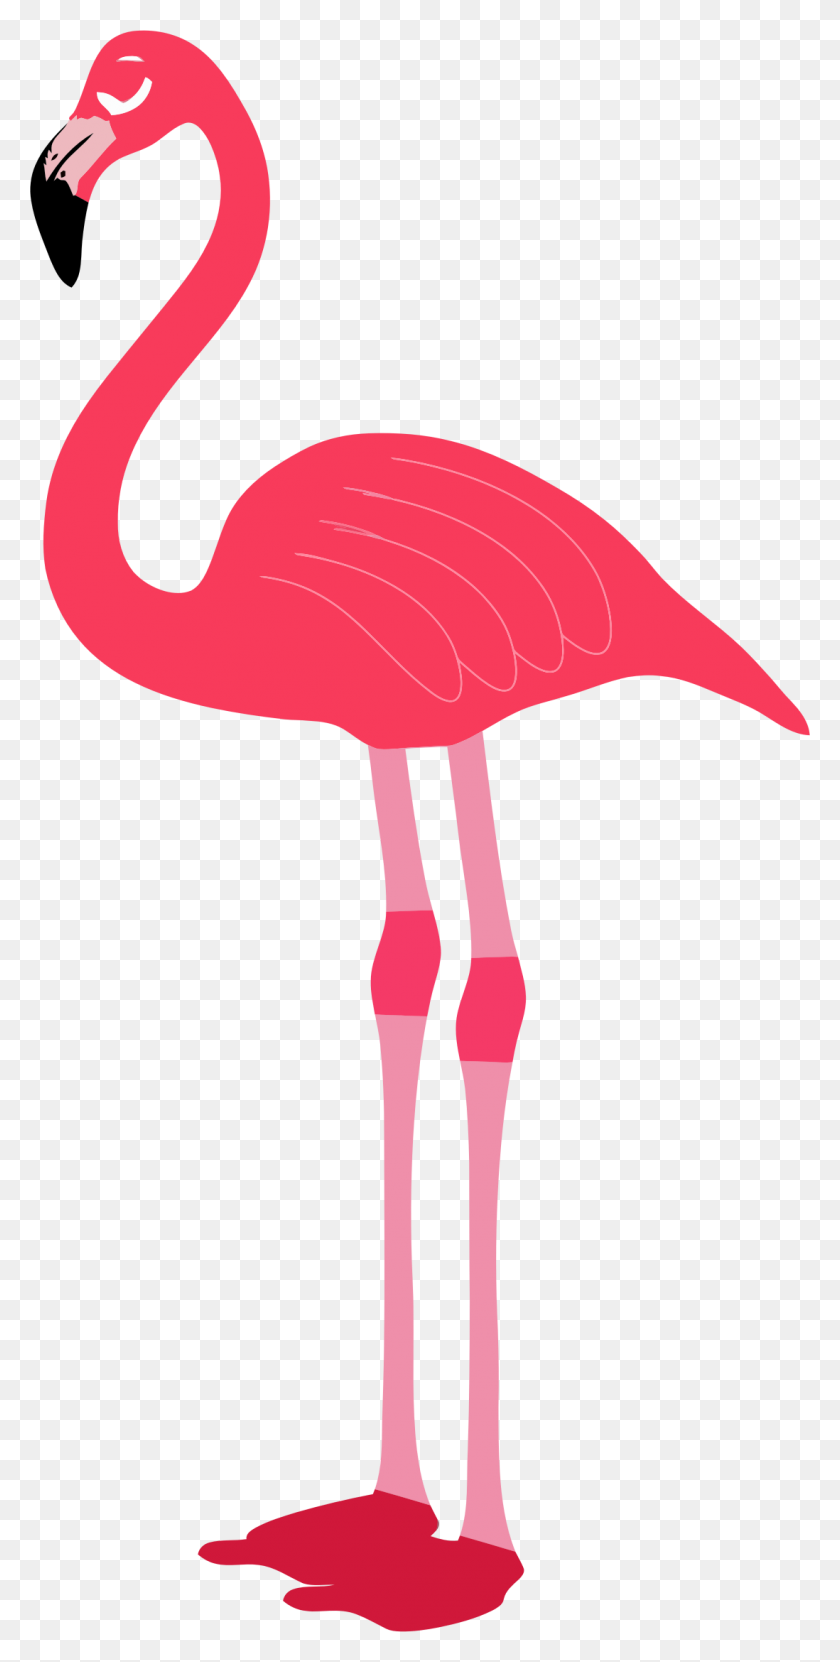 1098x2256 Flamingo Clipart At Getdrawings Free For Personal Use Flamingo - Flamingo Clipart Black And White